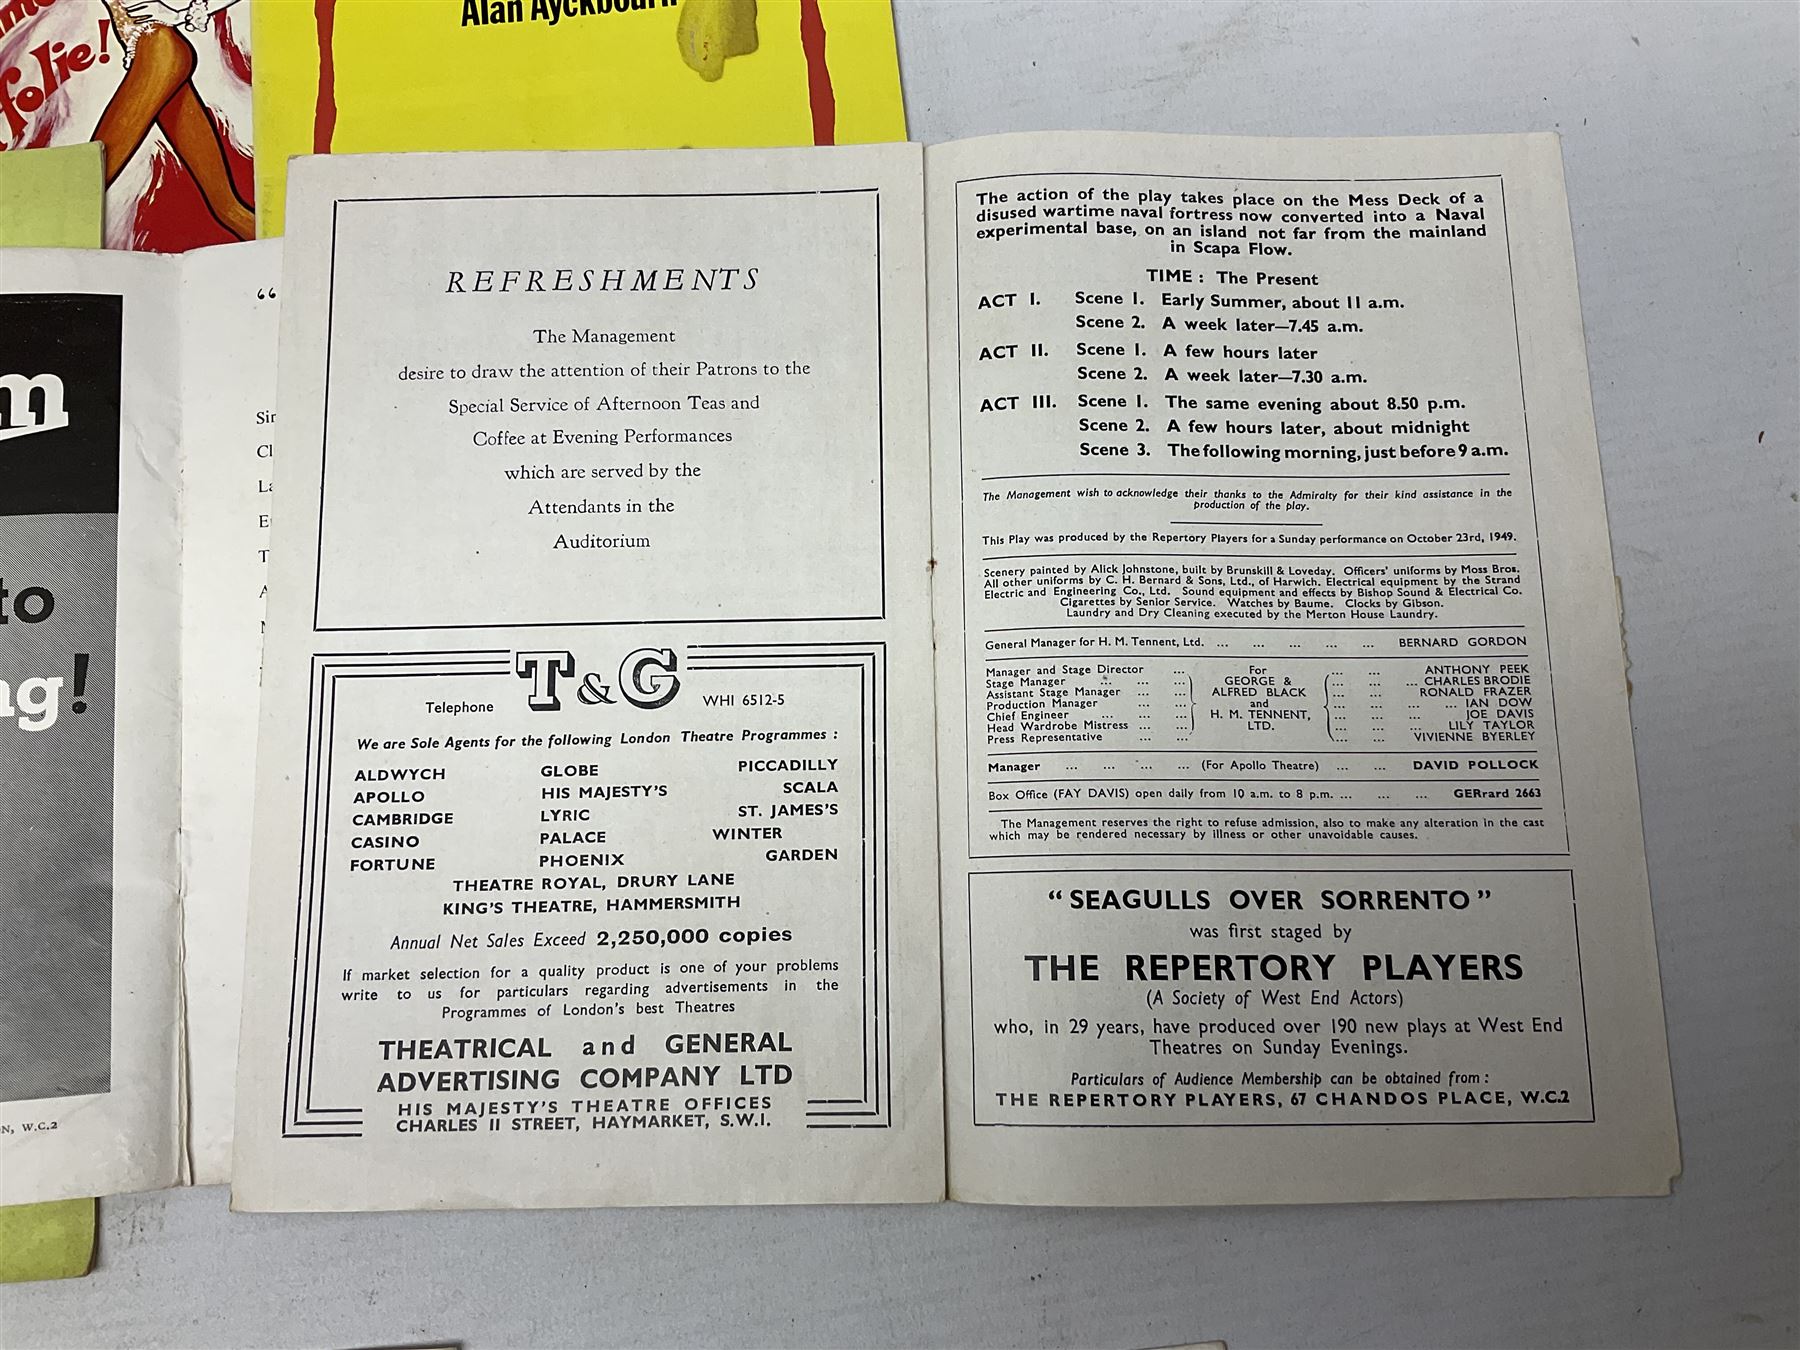 Over thirty theatre programmes 1940s and later including various London theatres - Apollo - Image 11 of 12